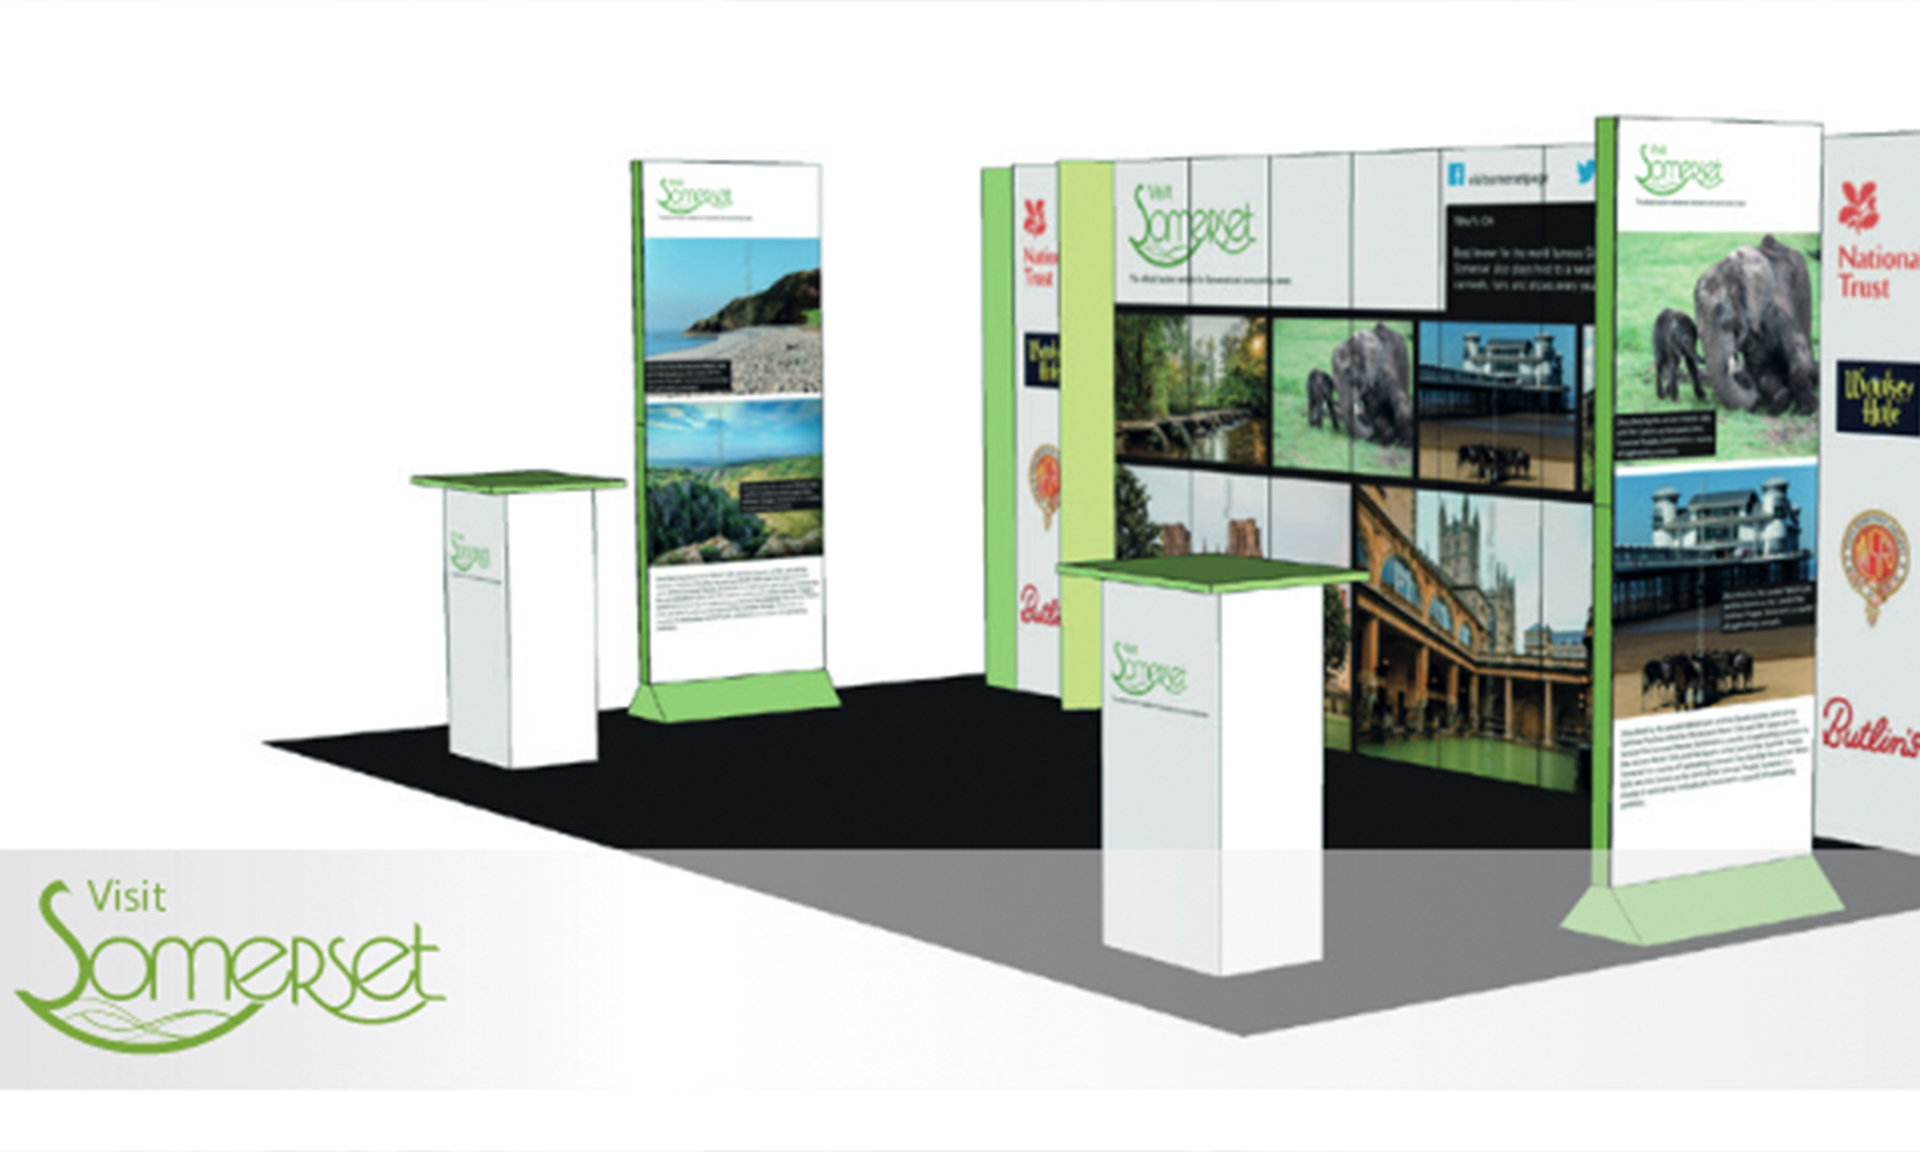 Exhibiting with recyclable displays - Visit Somerset